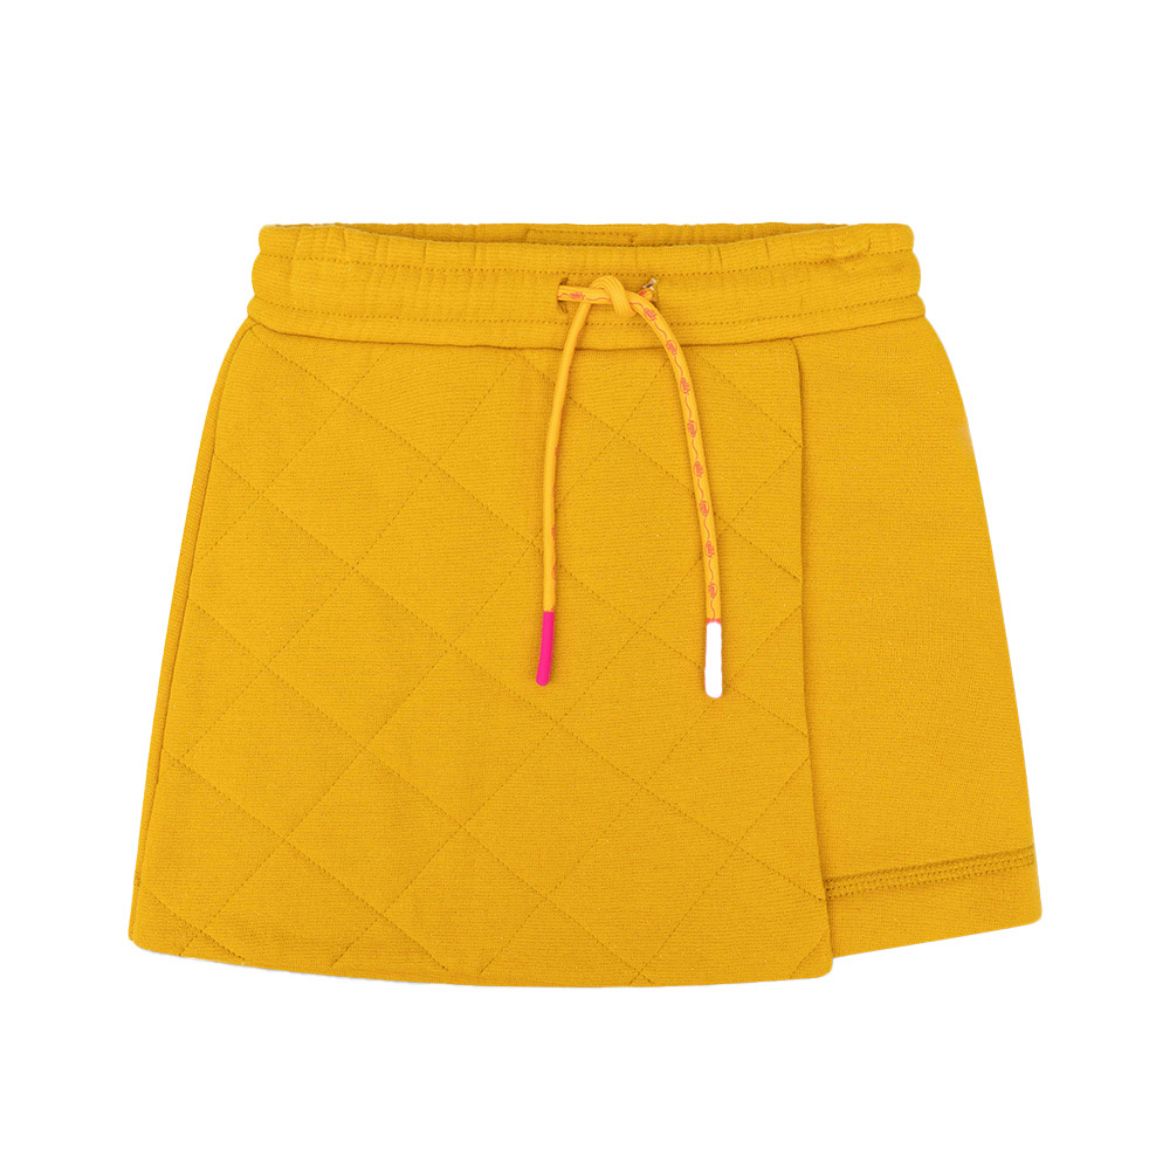 Picture of Oilily Girls Skip Yellow Skirt